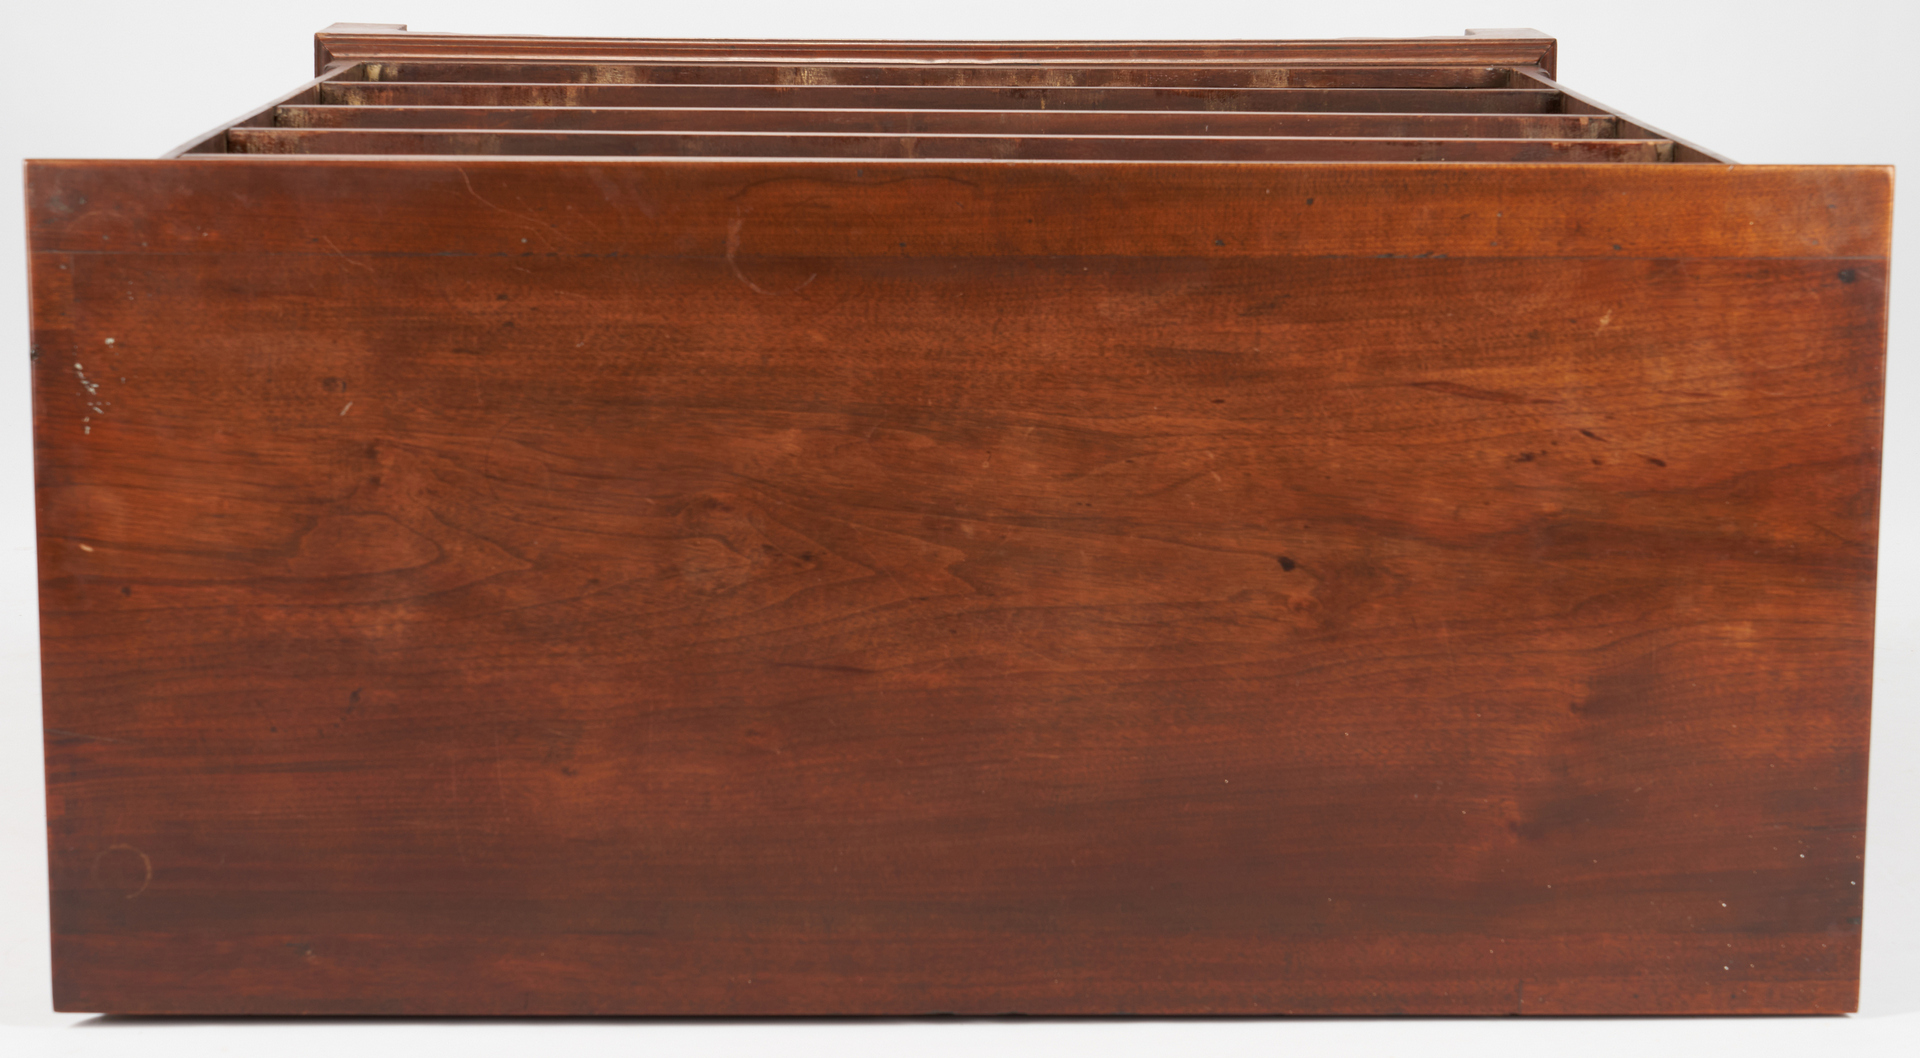 Lot 192: Heart Inlaid Chest of Drawers, poss. Virginia